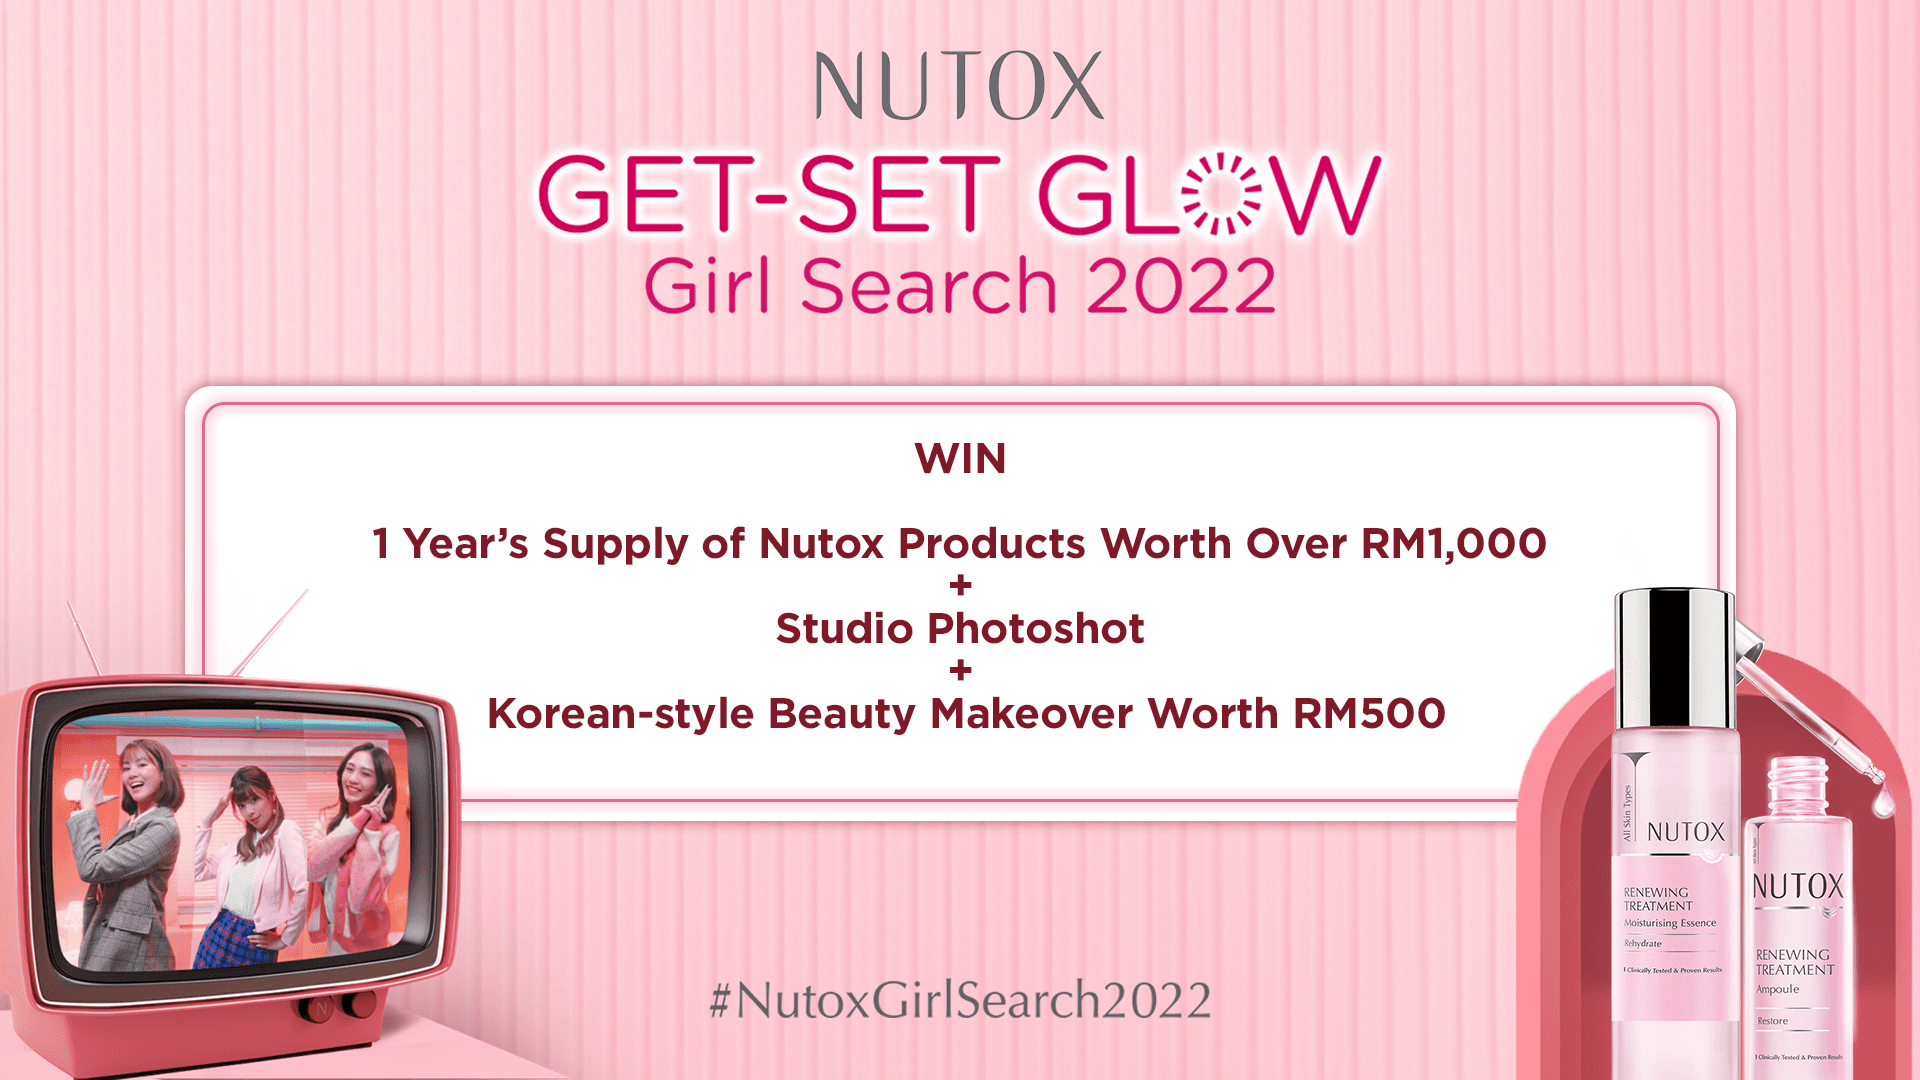 Show Off Your Glass Skin With Nutox Get-Set Glow!